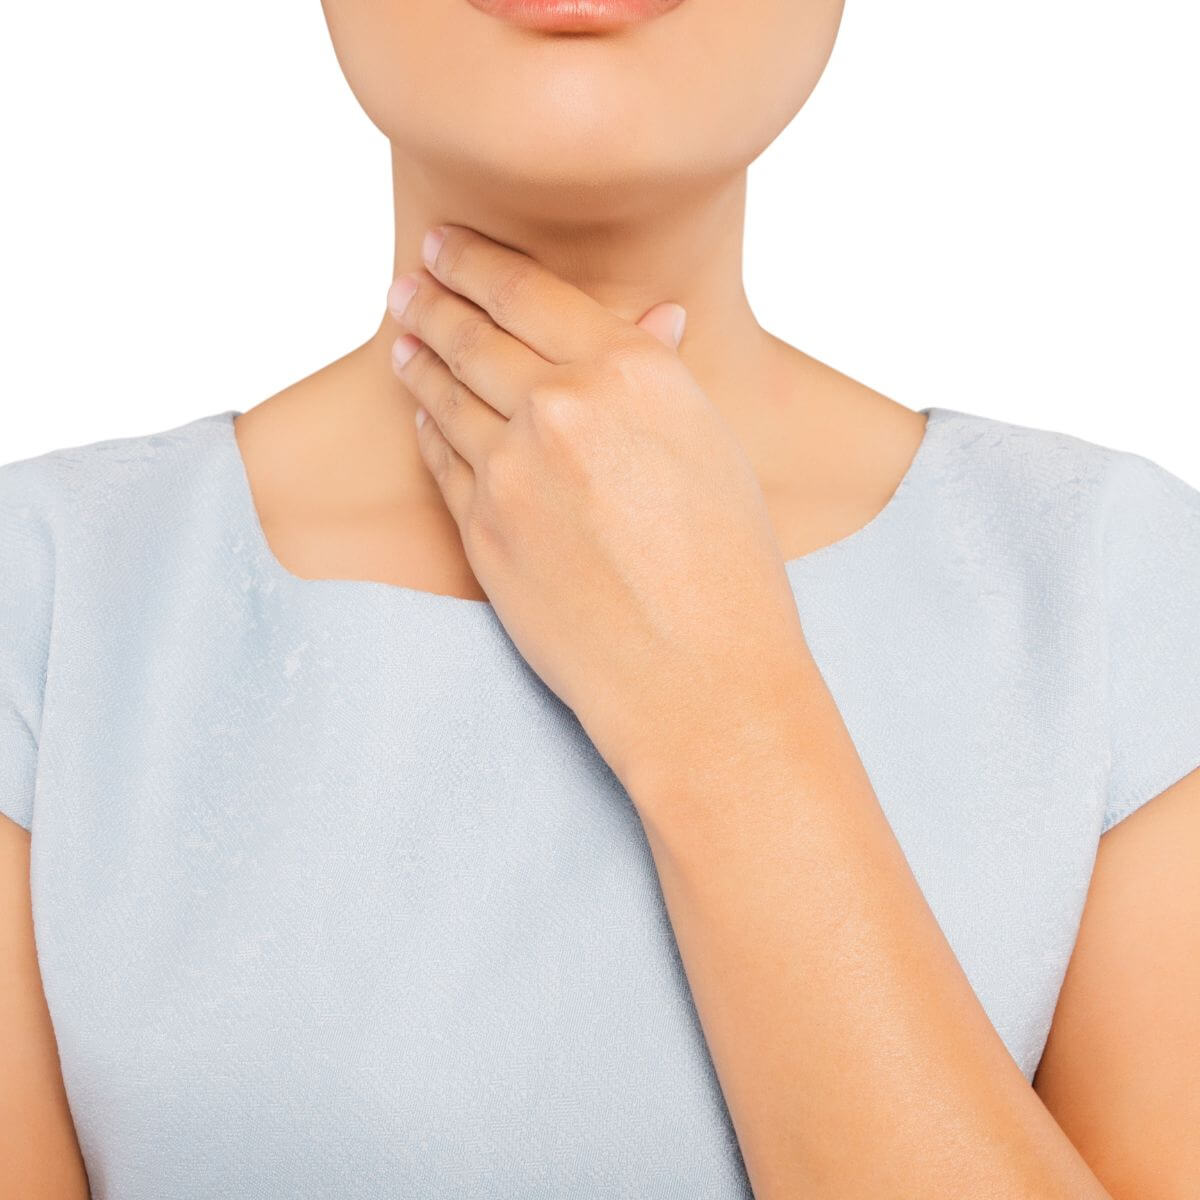 Symptoms of Thyroid Disease: What Every Woman Should Know